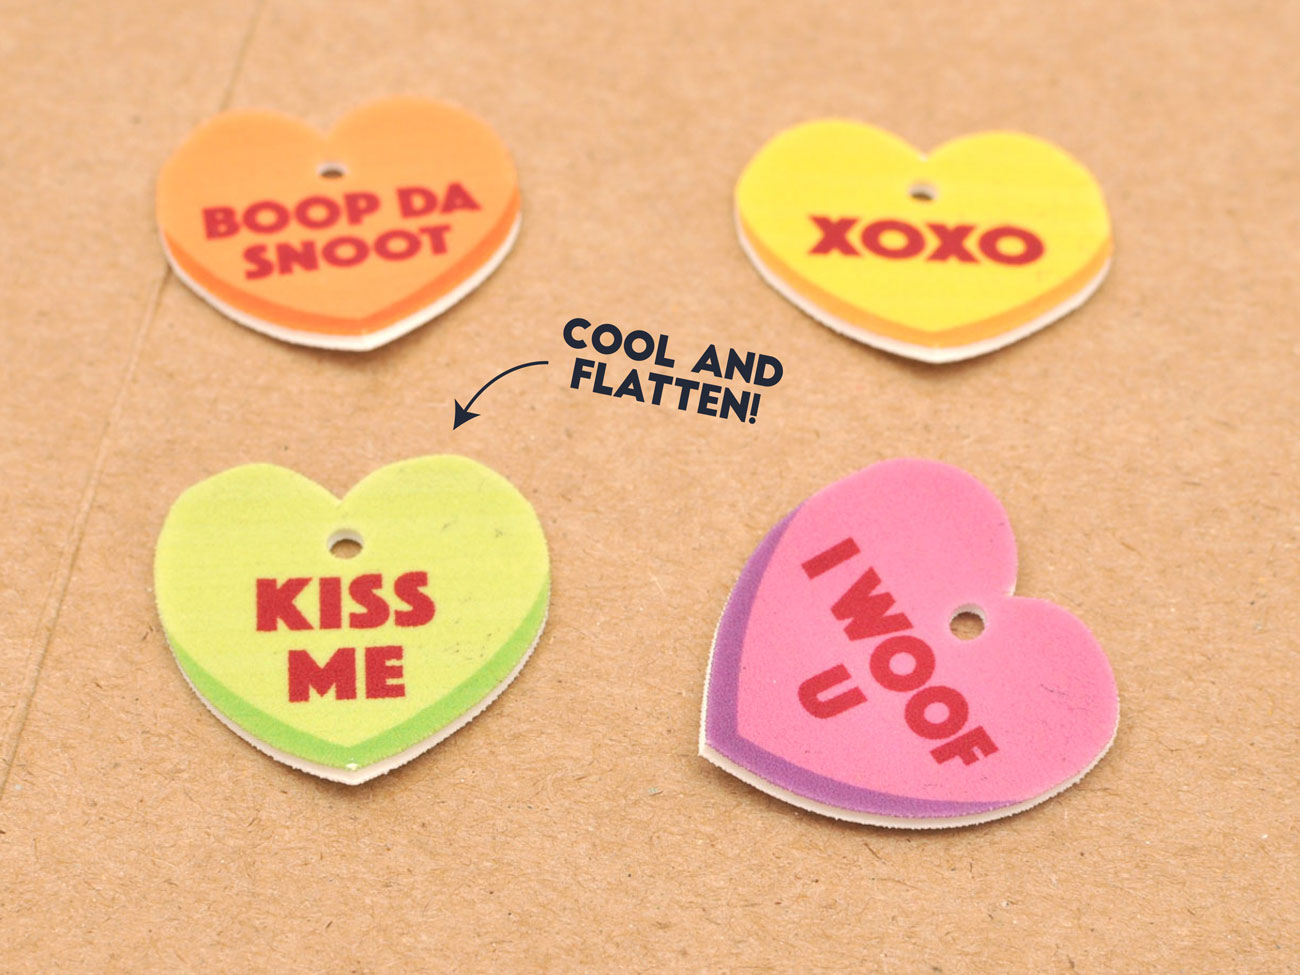 It's almost Valentine's Day, and we all know where your love REALLY lies! With only a few materials, you can make your pup a token of your affection that will also look adorable on his or her collar. Check out these easy Free Printable Conversation Heart Collar Charms for the perfect gift!